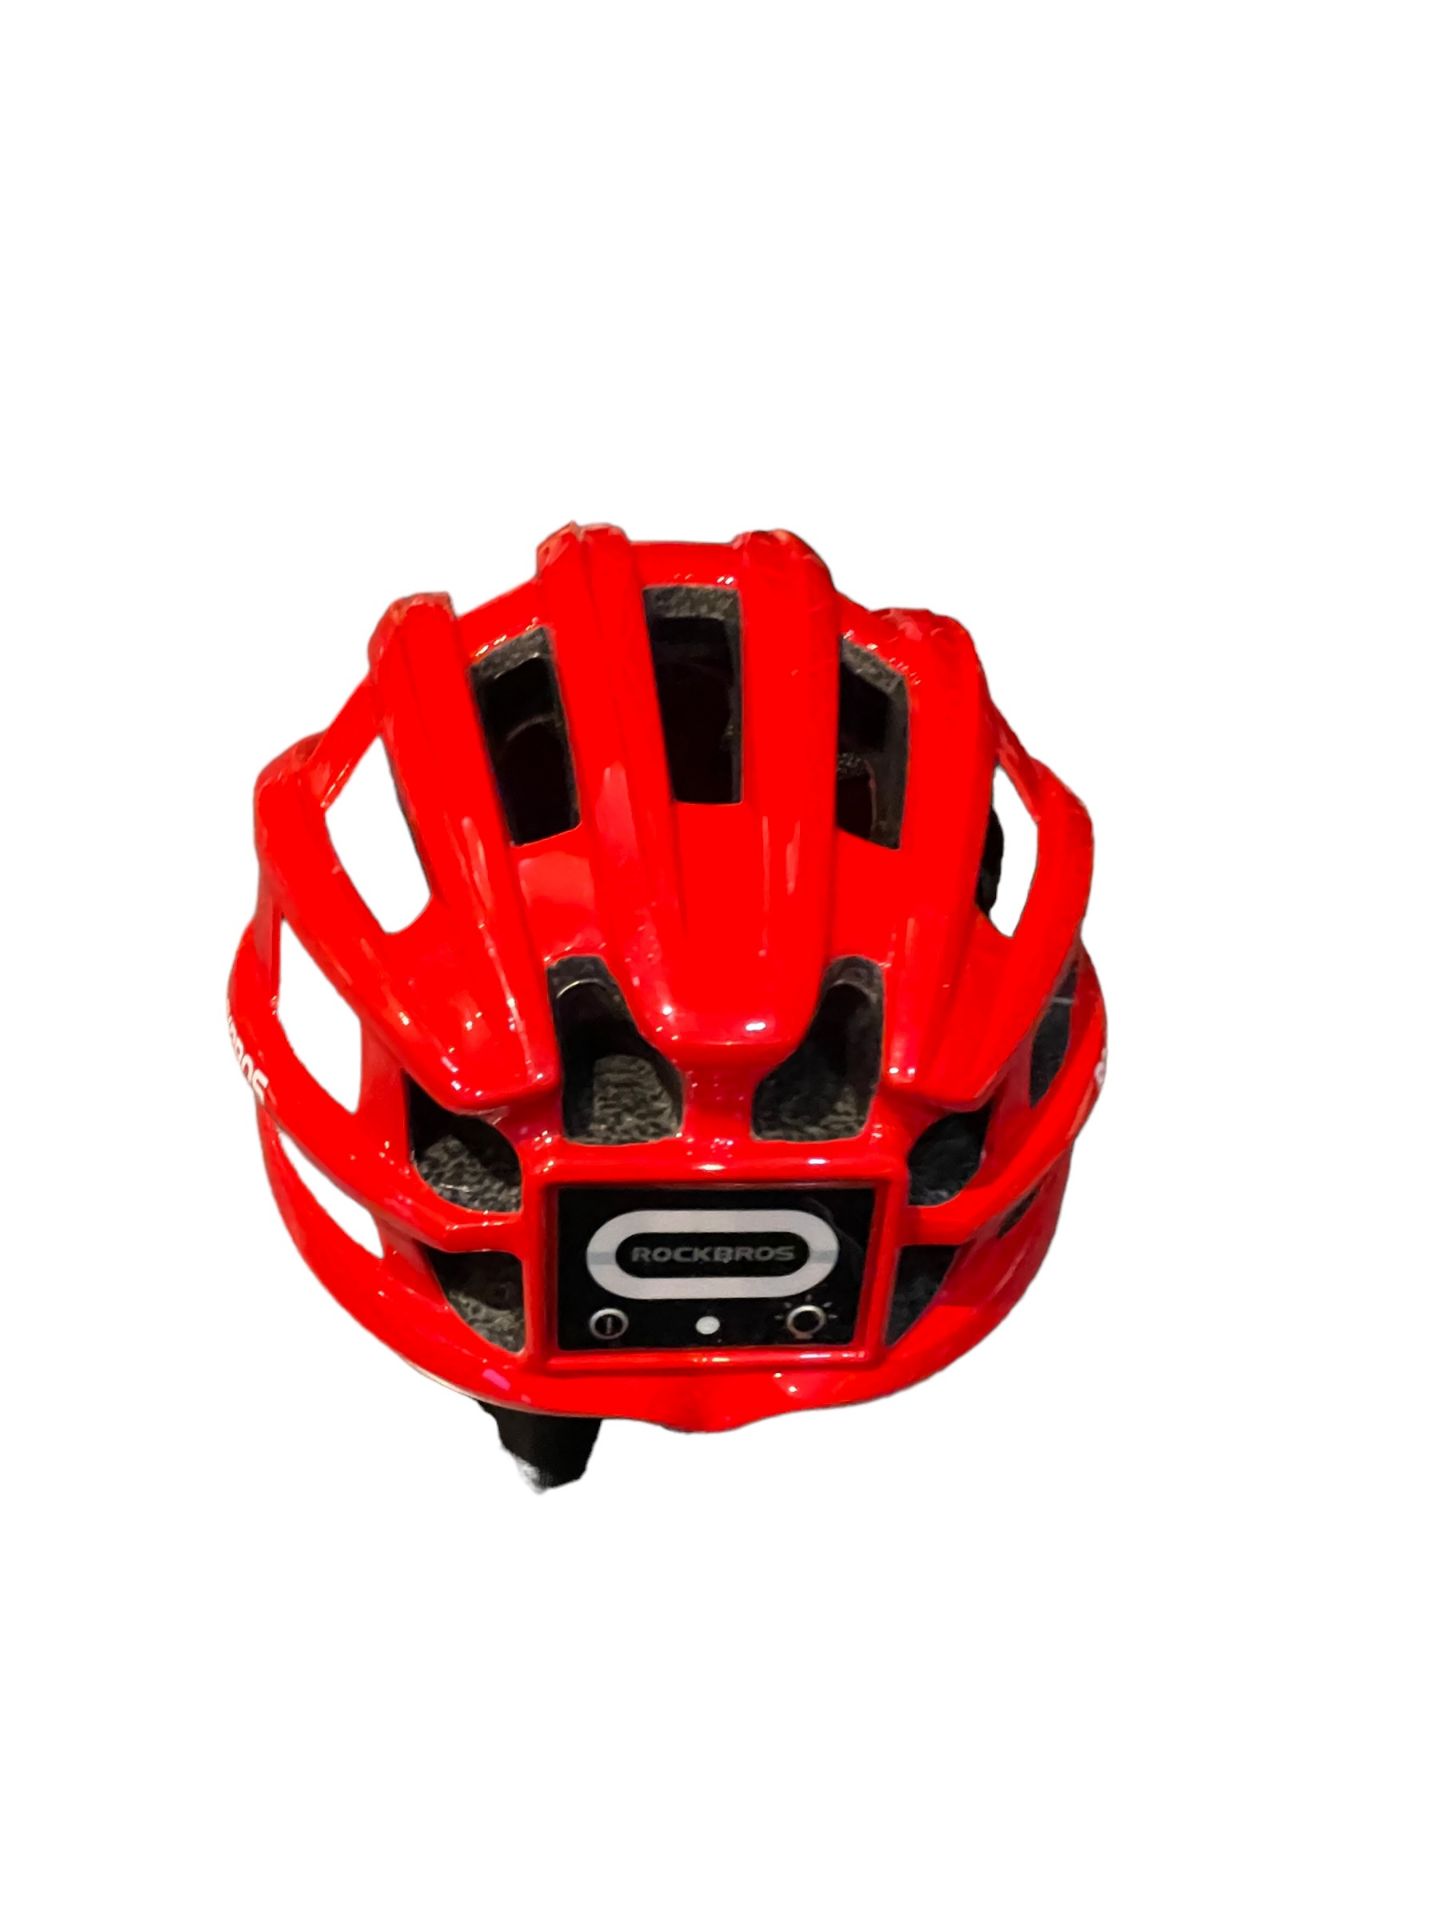 Rock Bros Cycling Helmet fully working boxed demo